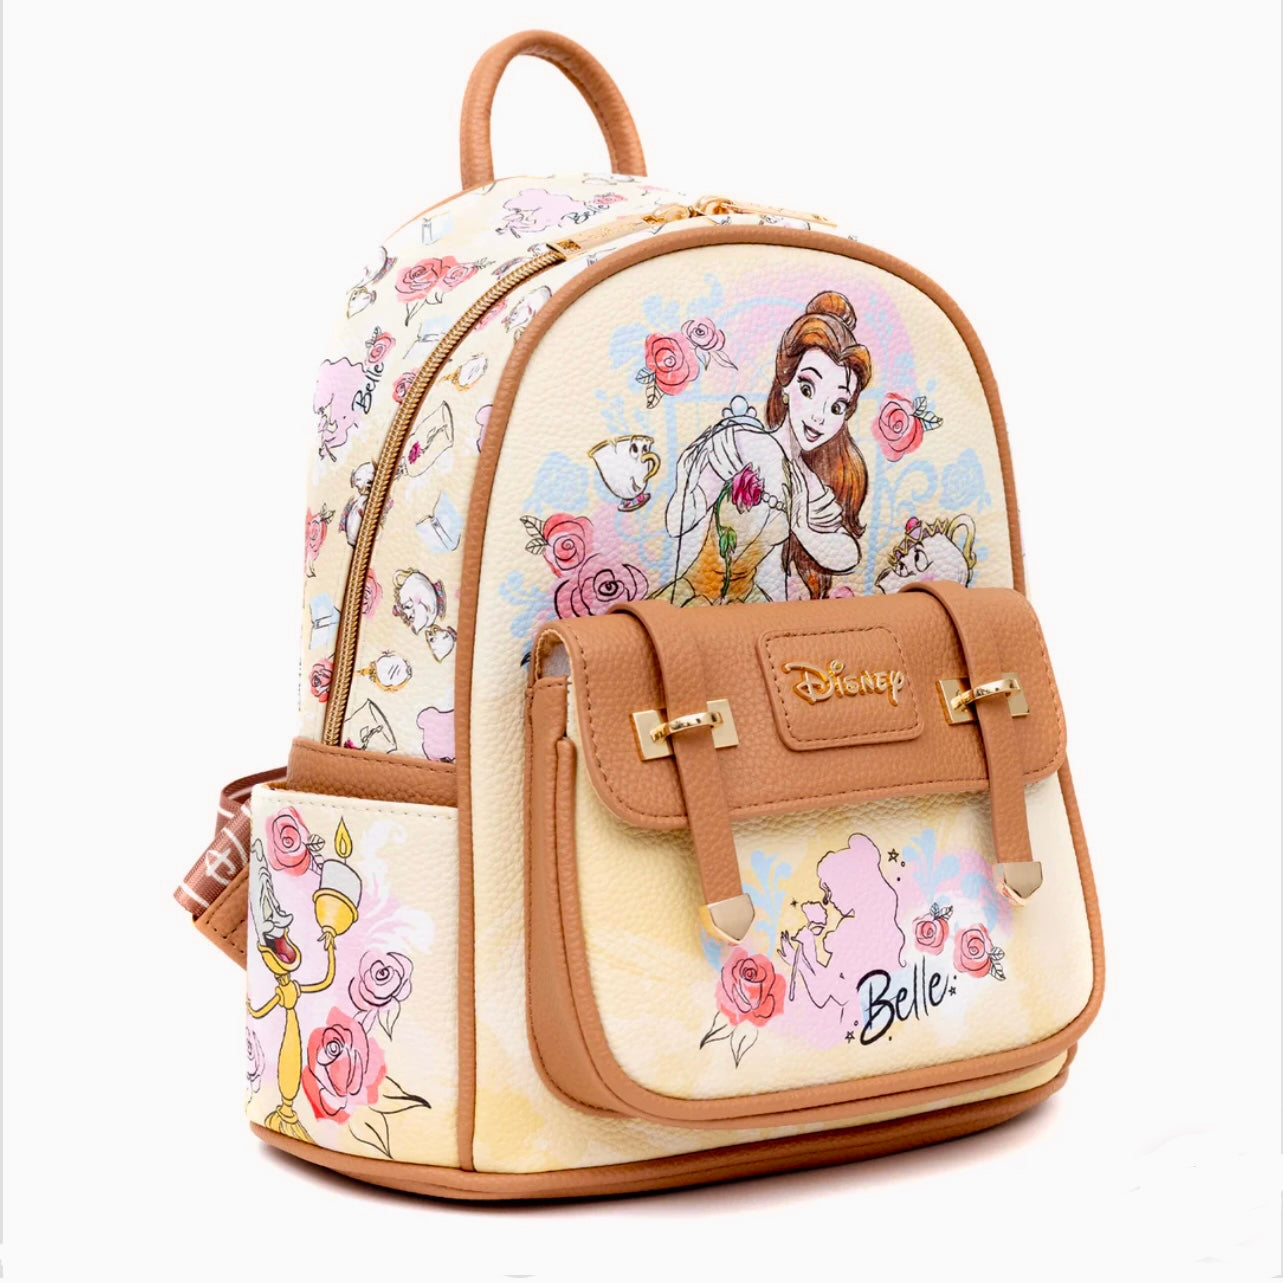 Exclusive Limited Edition-Beauty and the Beast Vegan Leather Backpack